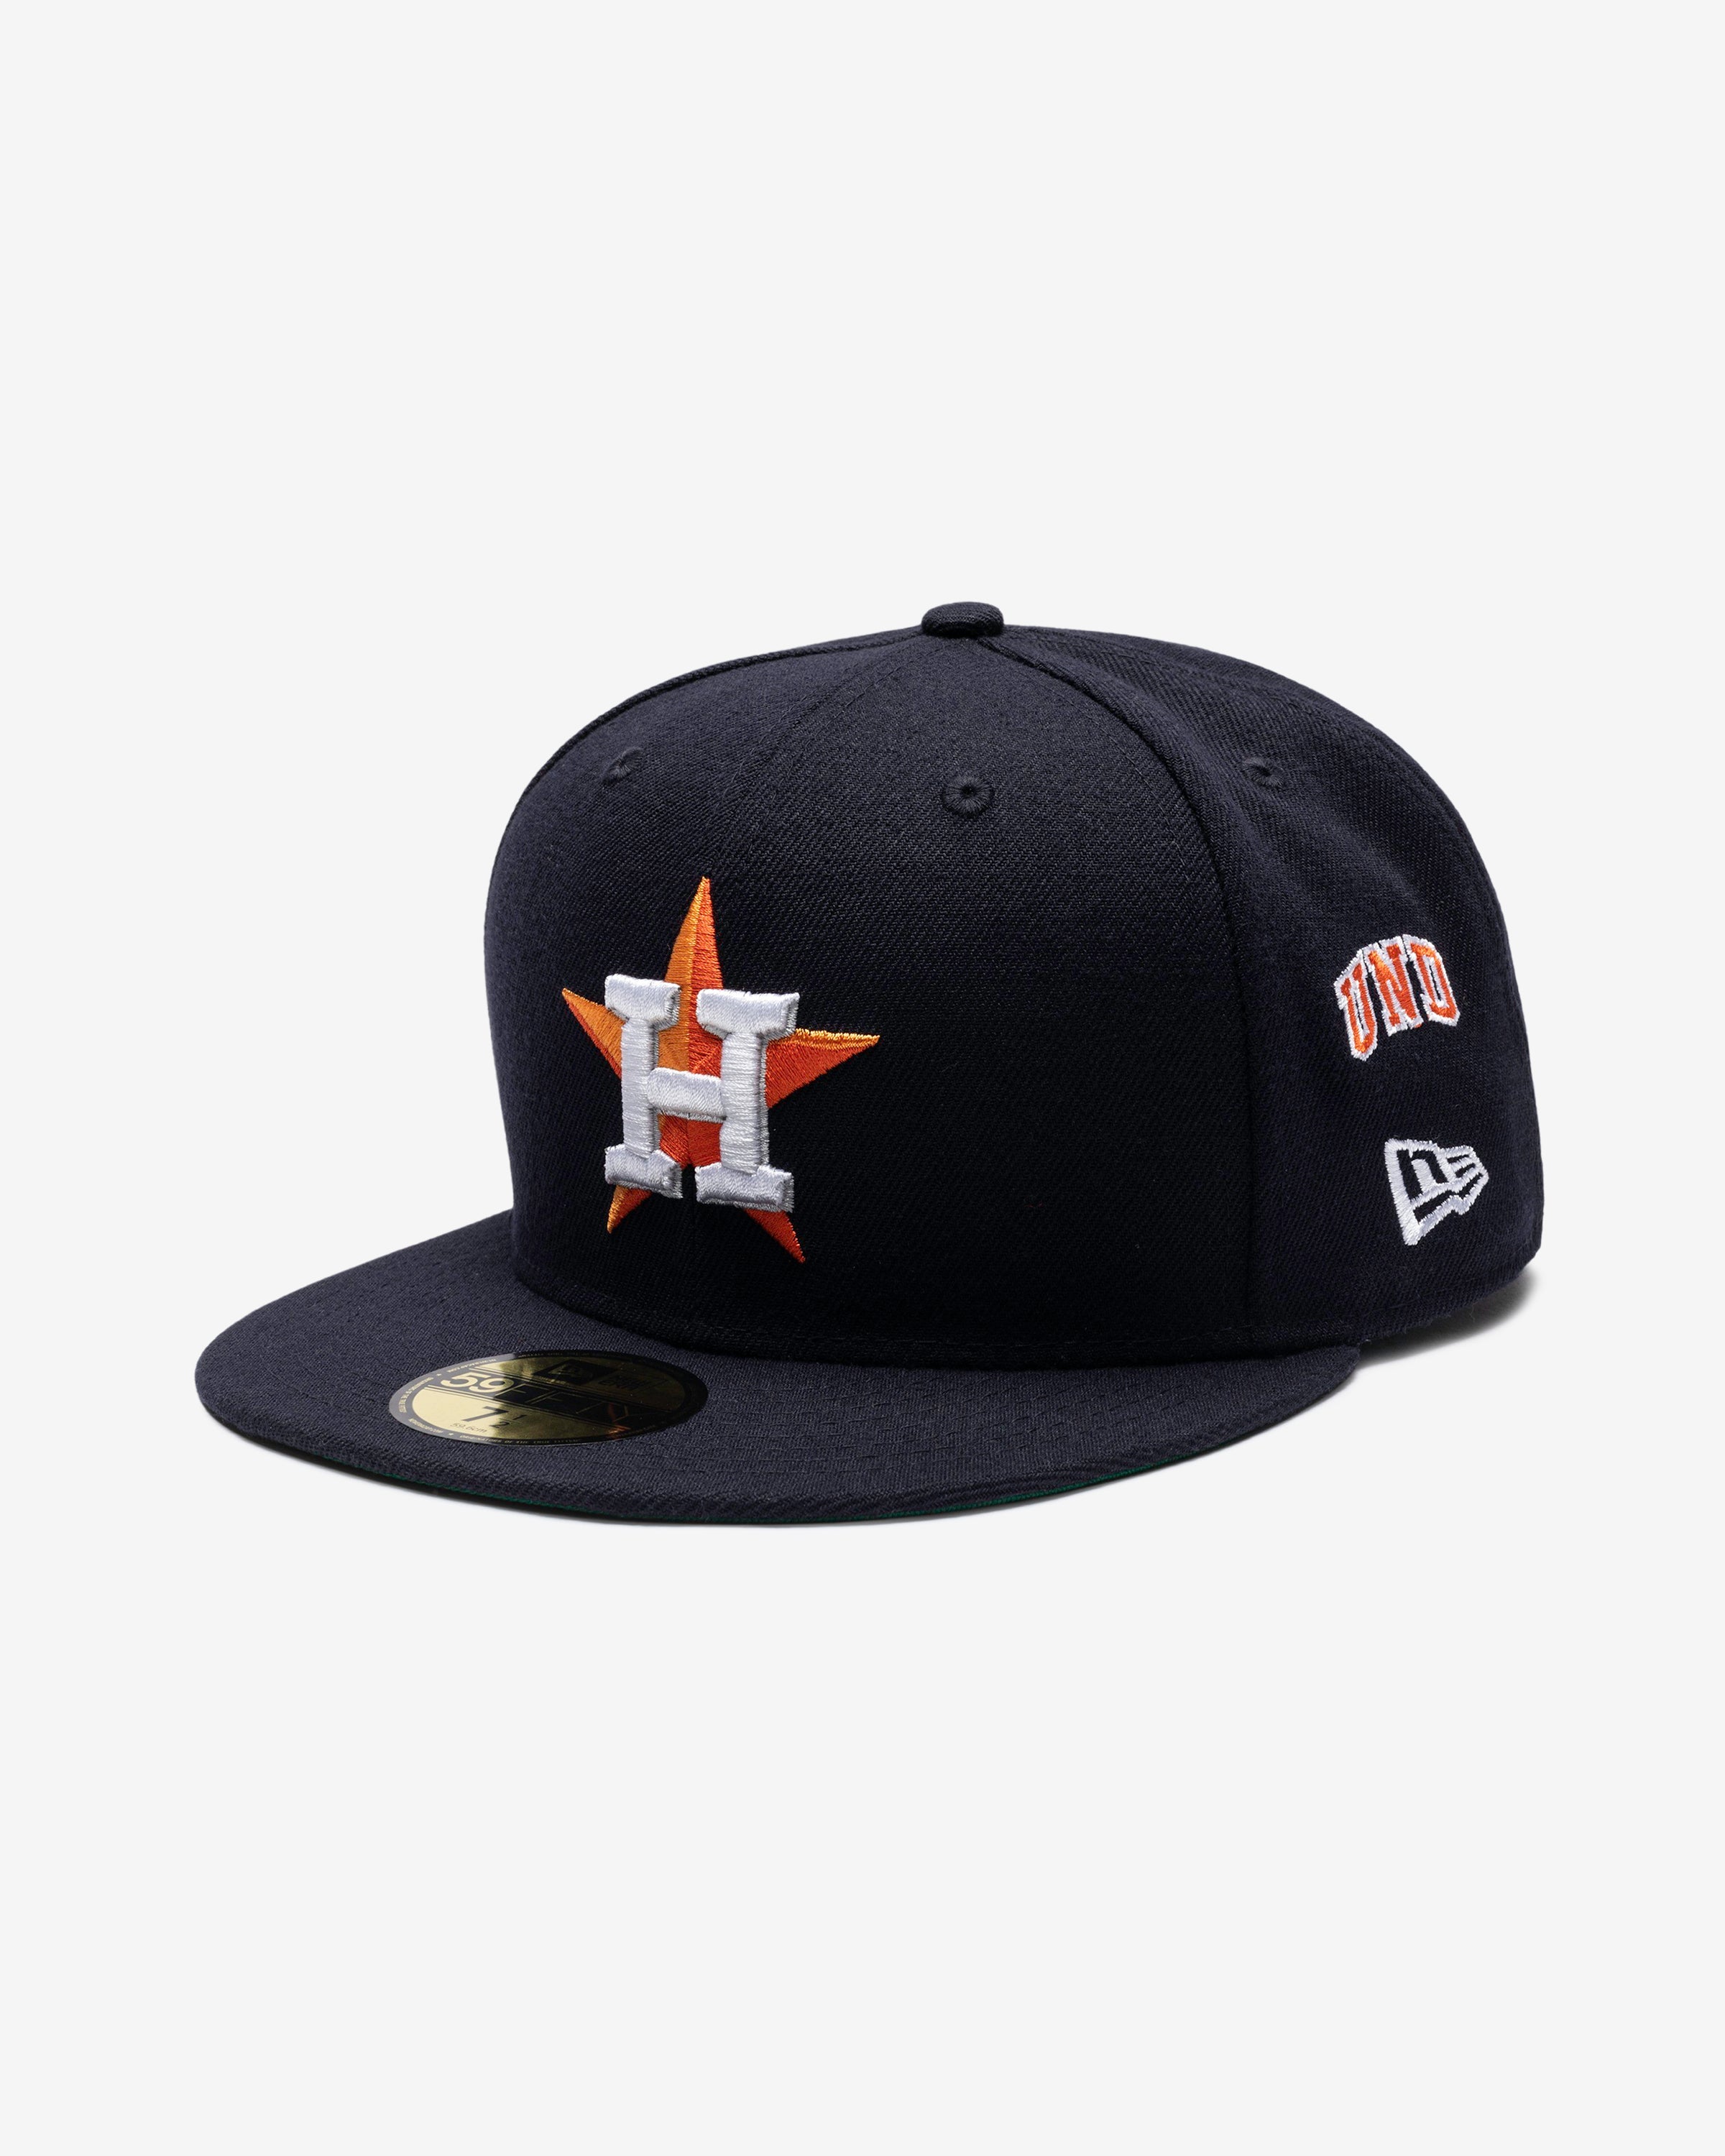 UNDEFEATED X NE X MLB FITTED - HOUSTON ASTROS – Undefeated